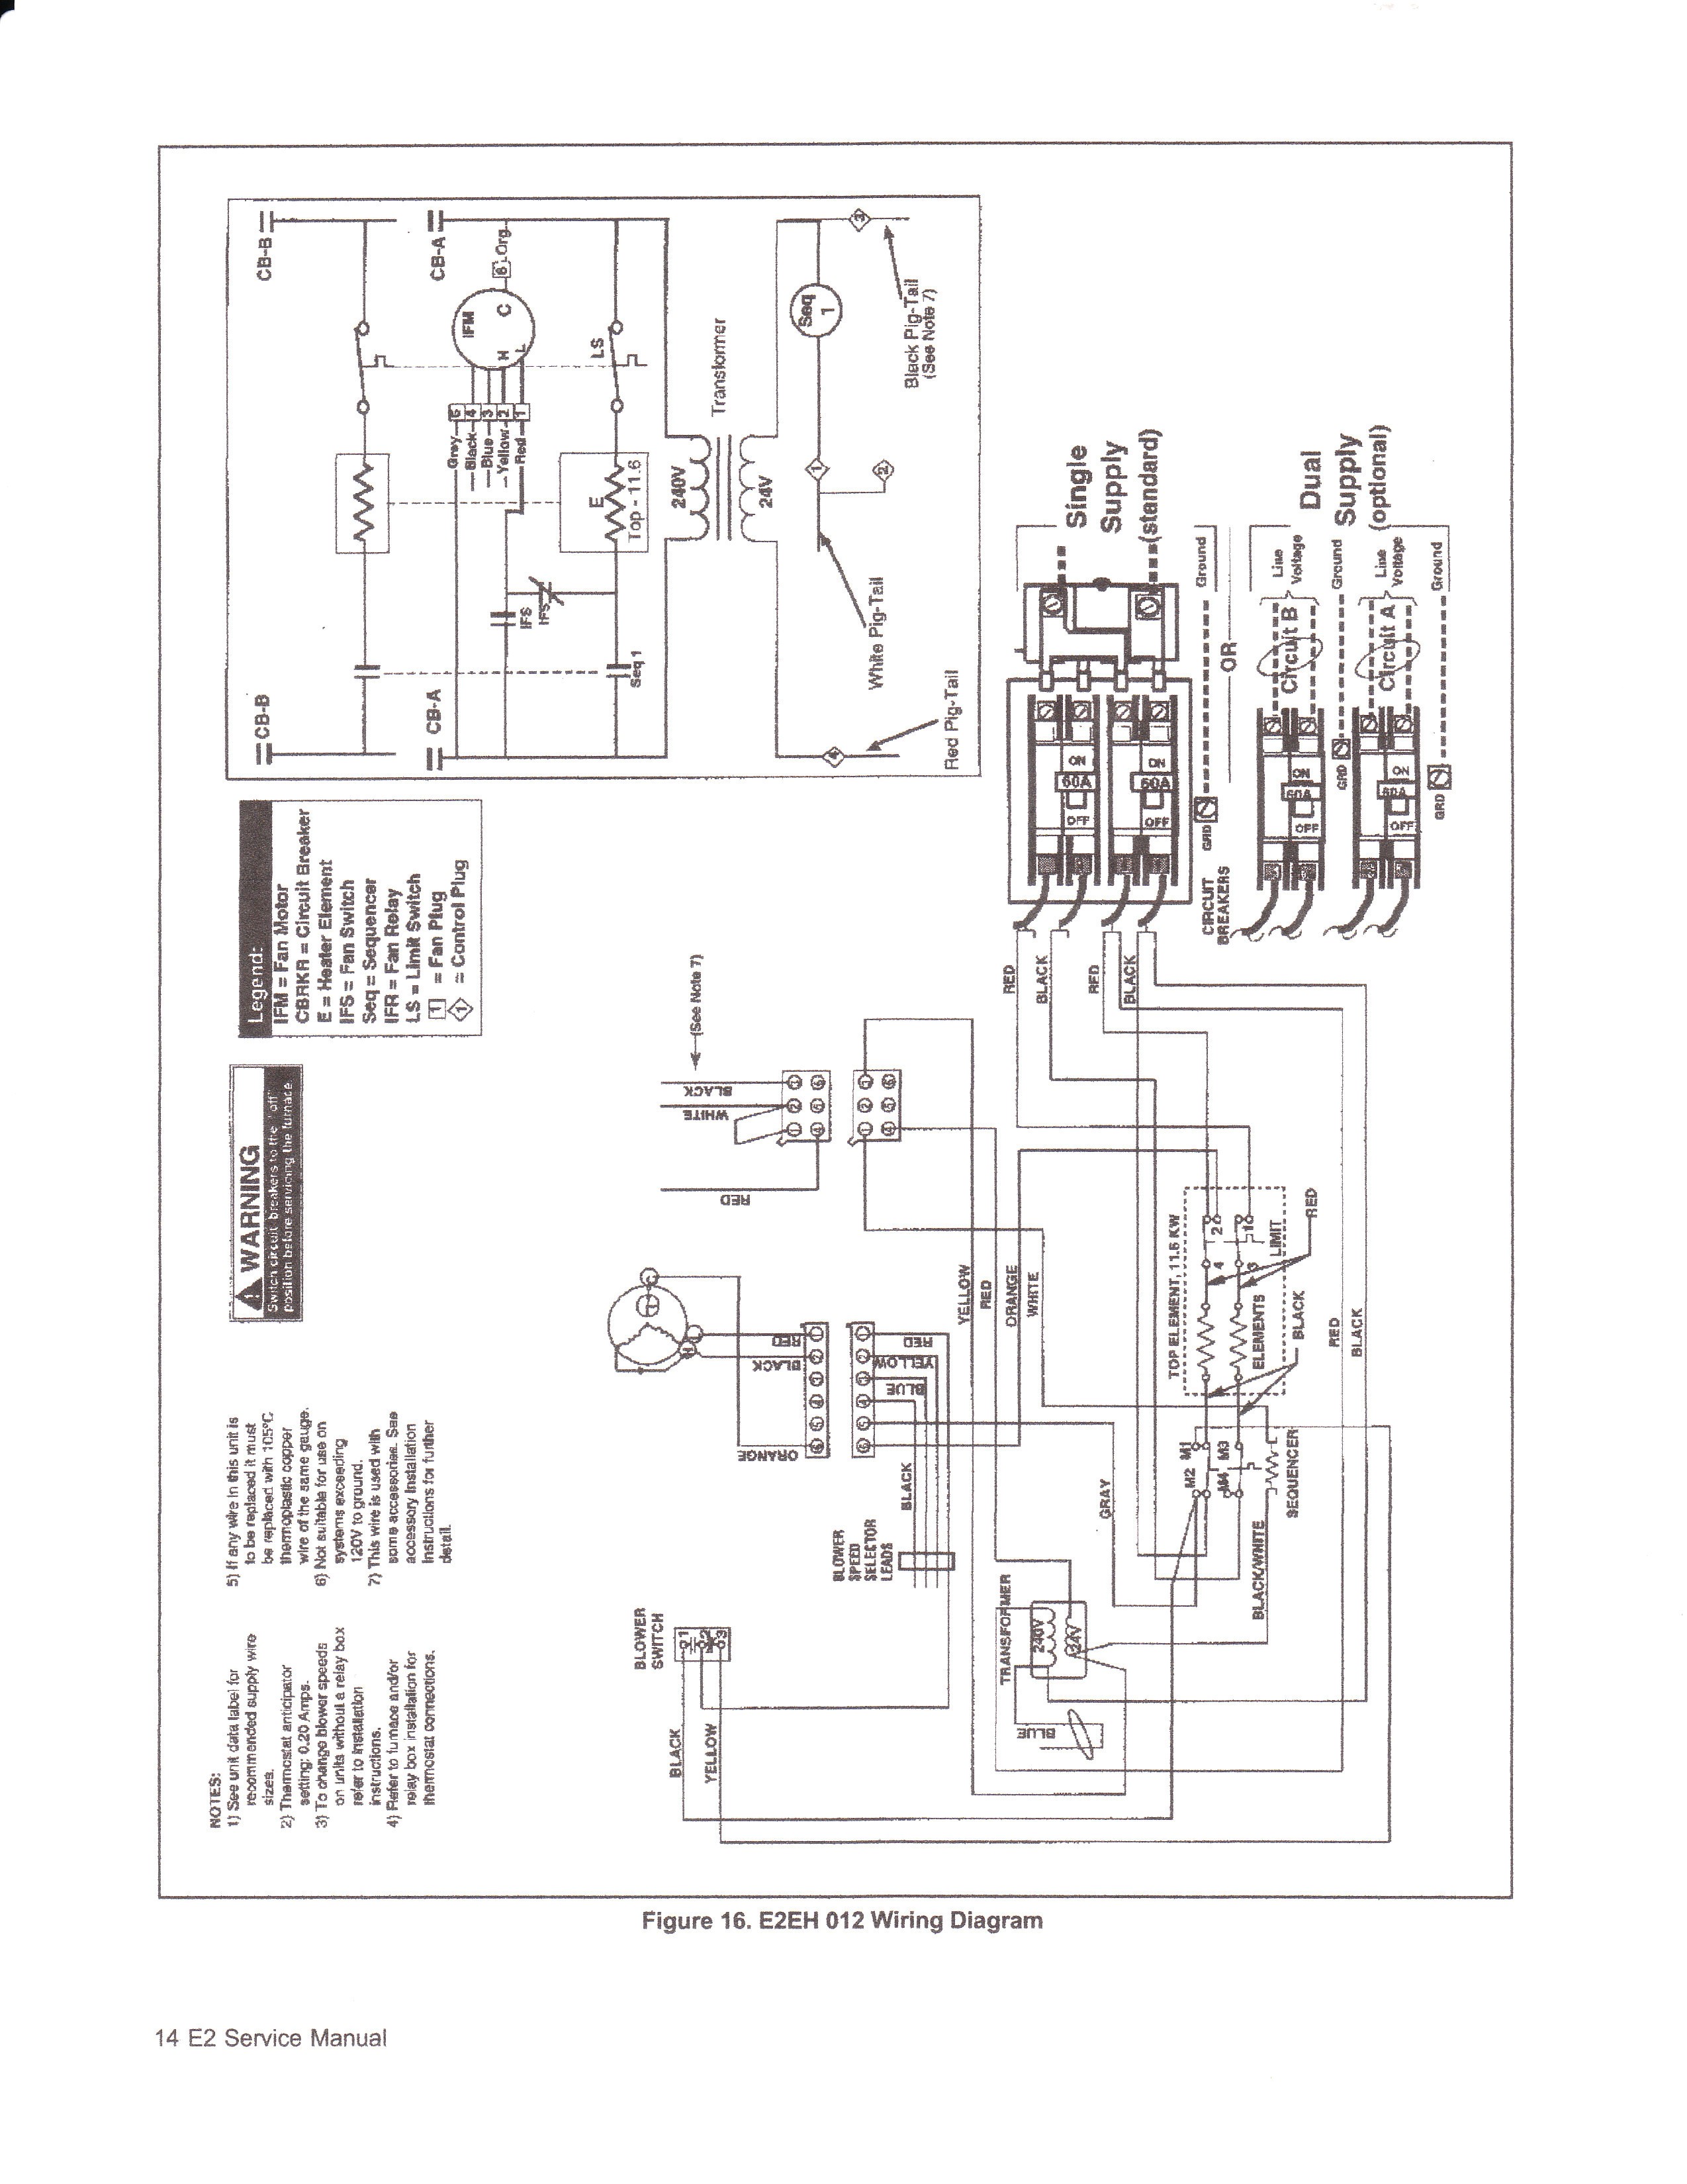 Coleman Electric Furnace Wiring Diagram Wiring Diagram for A Gas Furnace Fresh Mobile Home Coleman Gas Of Coleman Electric Furnace Wiring Diagram